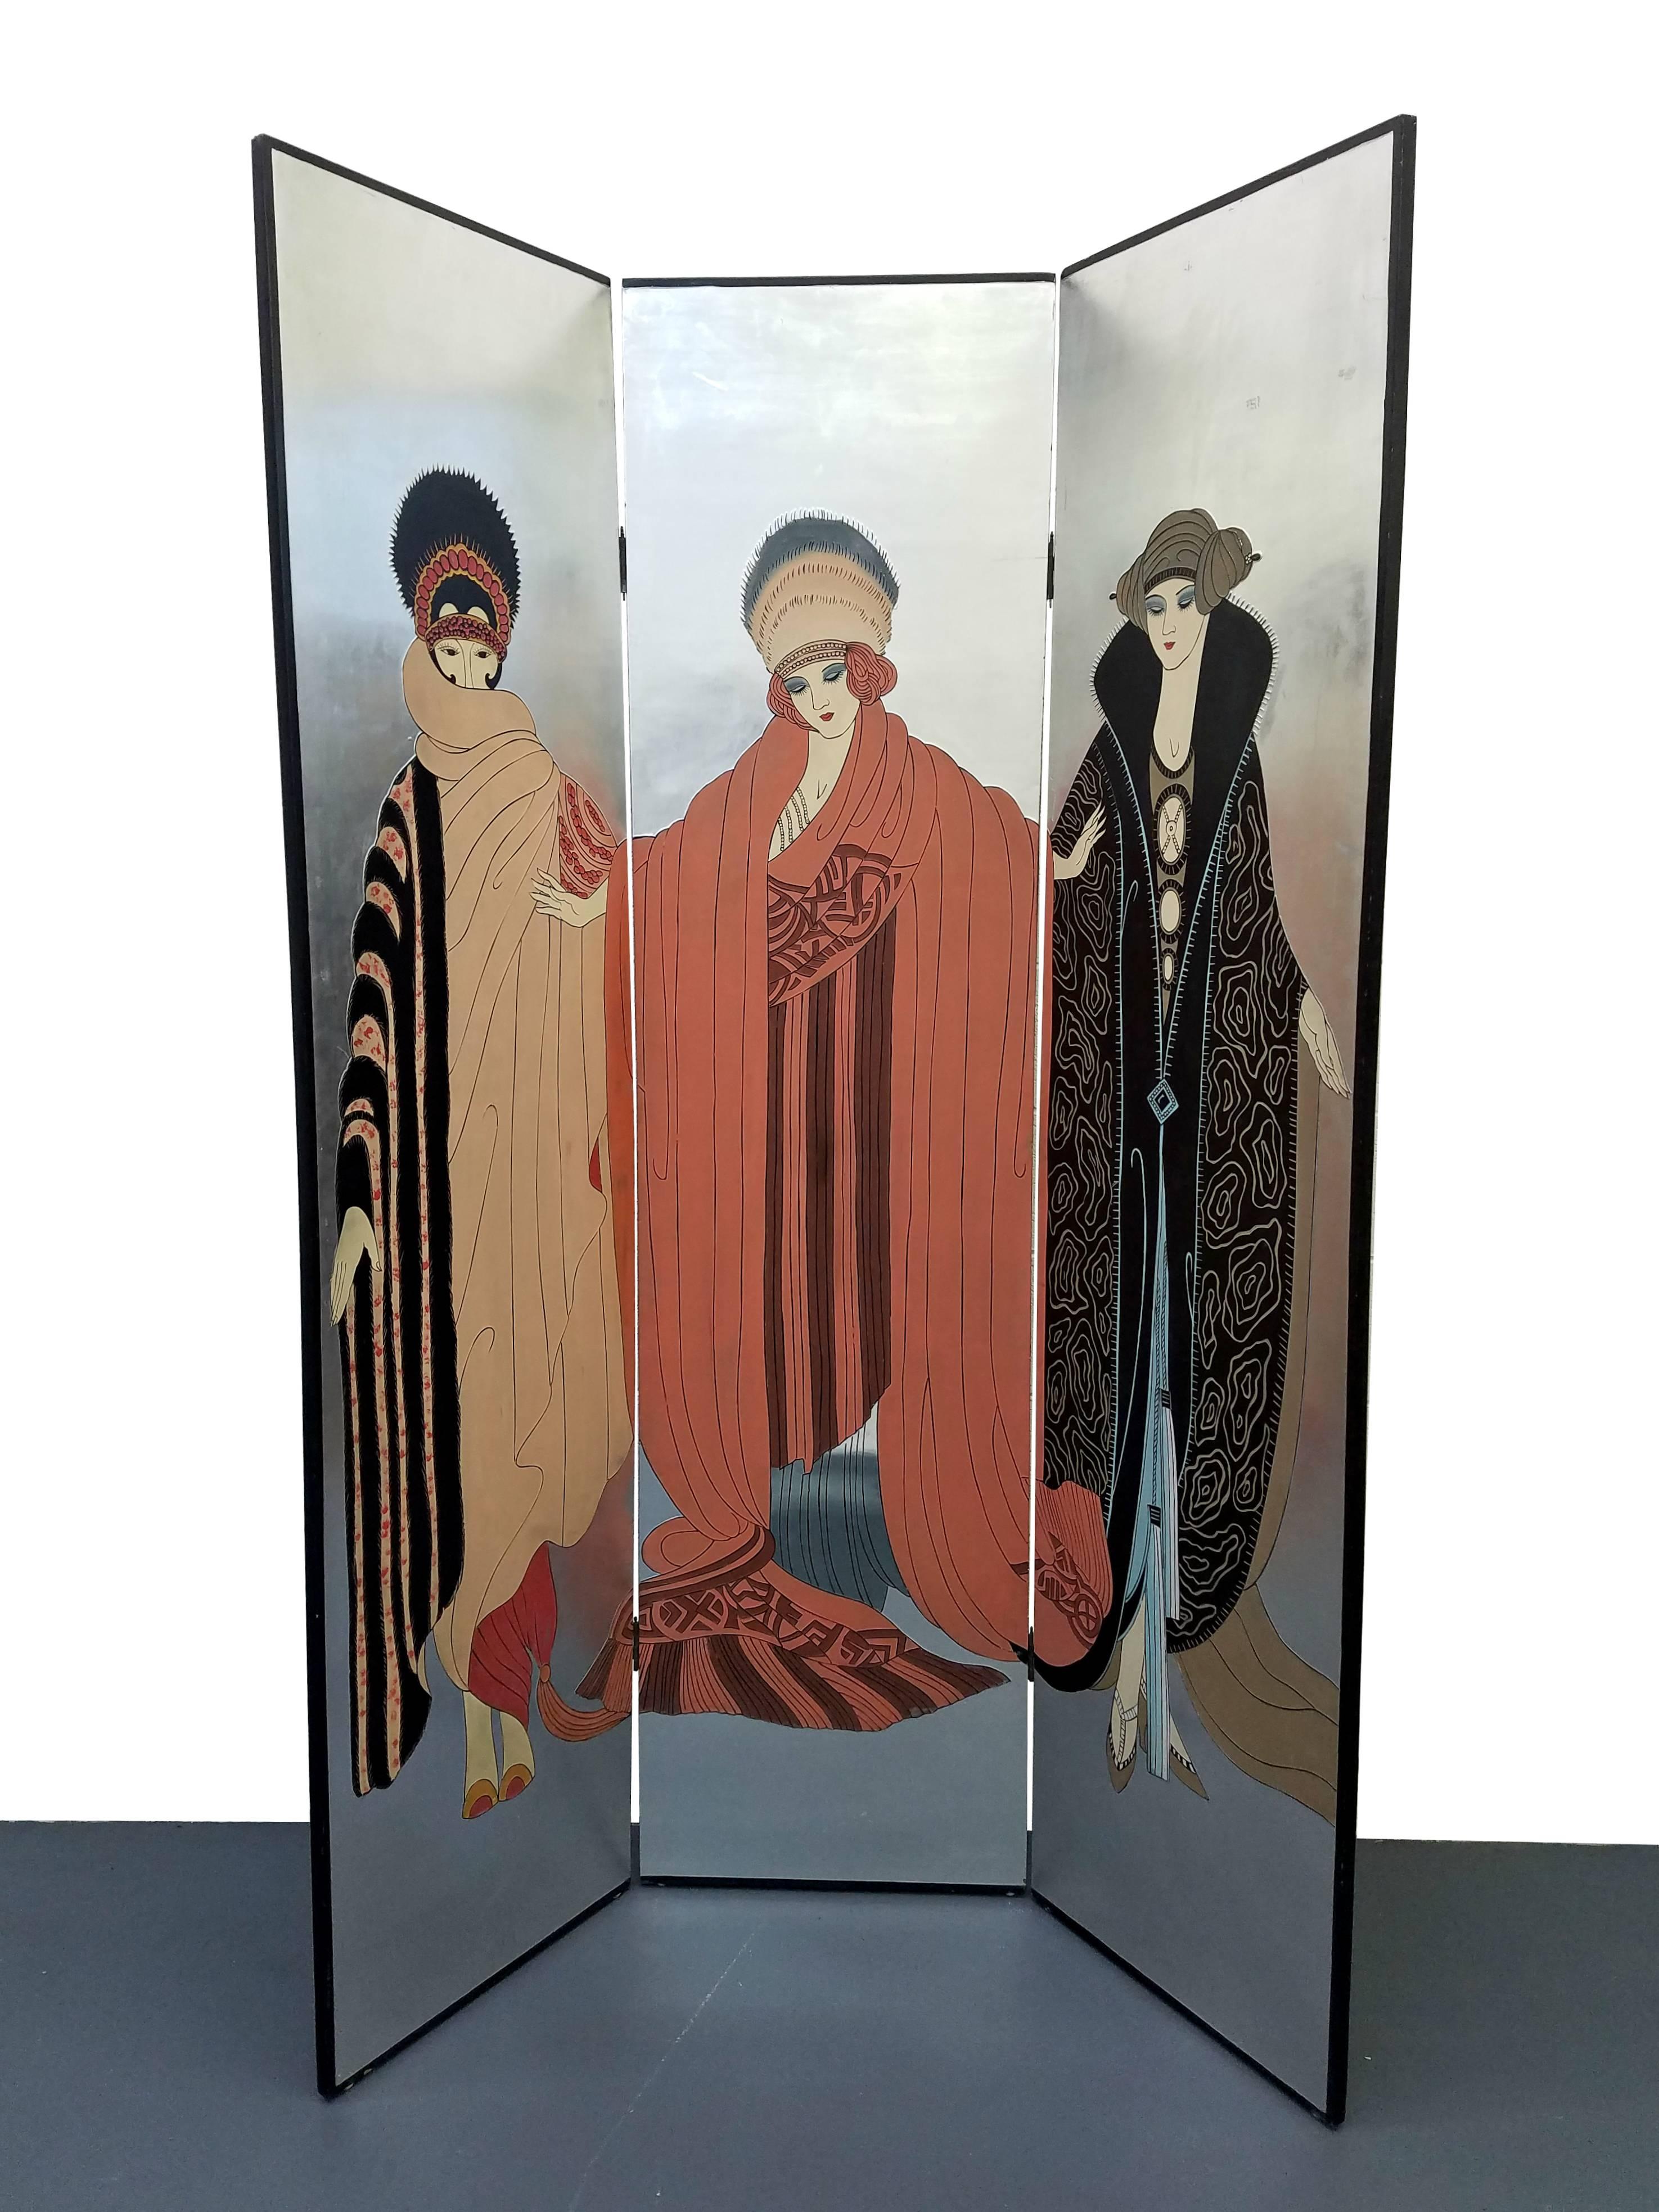 Authentic Art Deco three-panel screen room divider in the style of Erte. Screen features three panels adorned with Art Deco styled ladies on a gorgeous silver leaf background. Panels have a wonderful dimensional texture that creates depth and